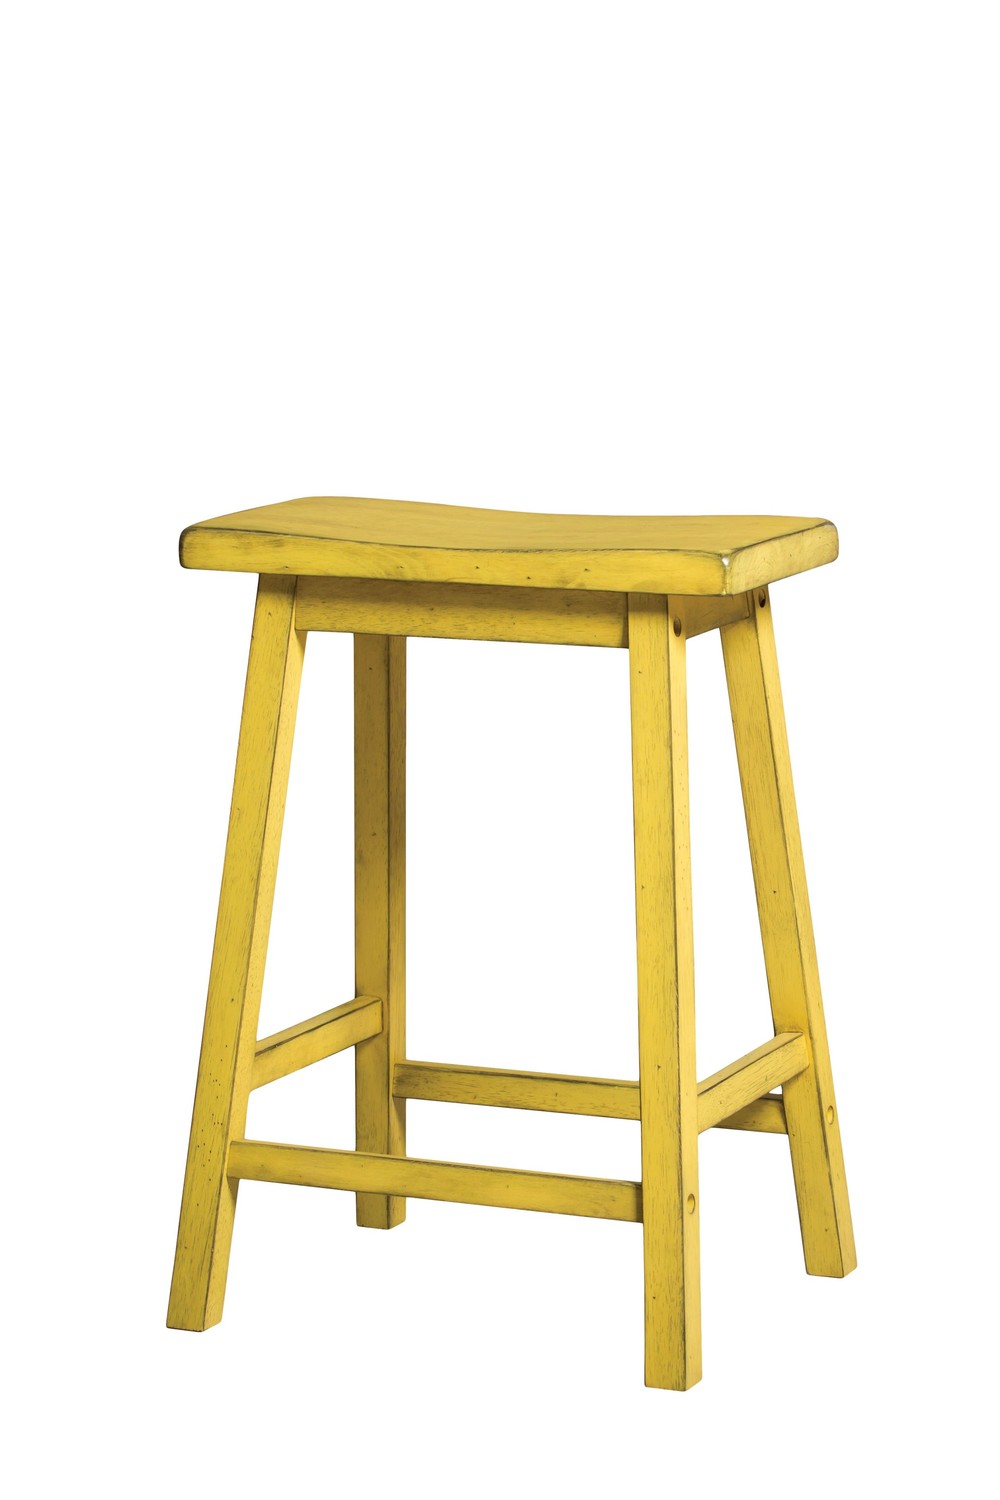 Set of 2 - 24" Distressed Yellow Wooden Finish Saddle Seat Backless Stools